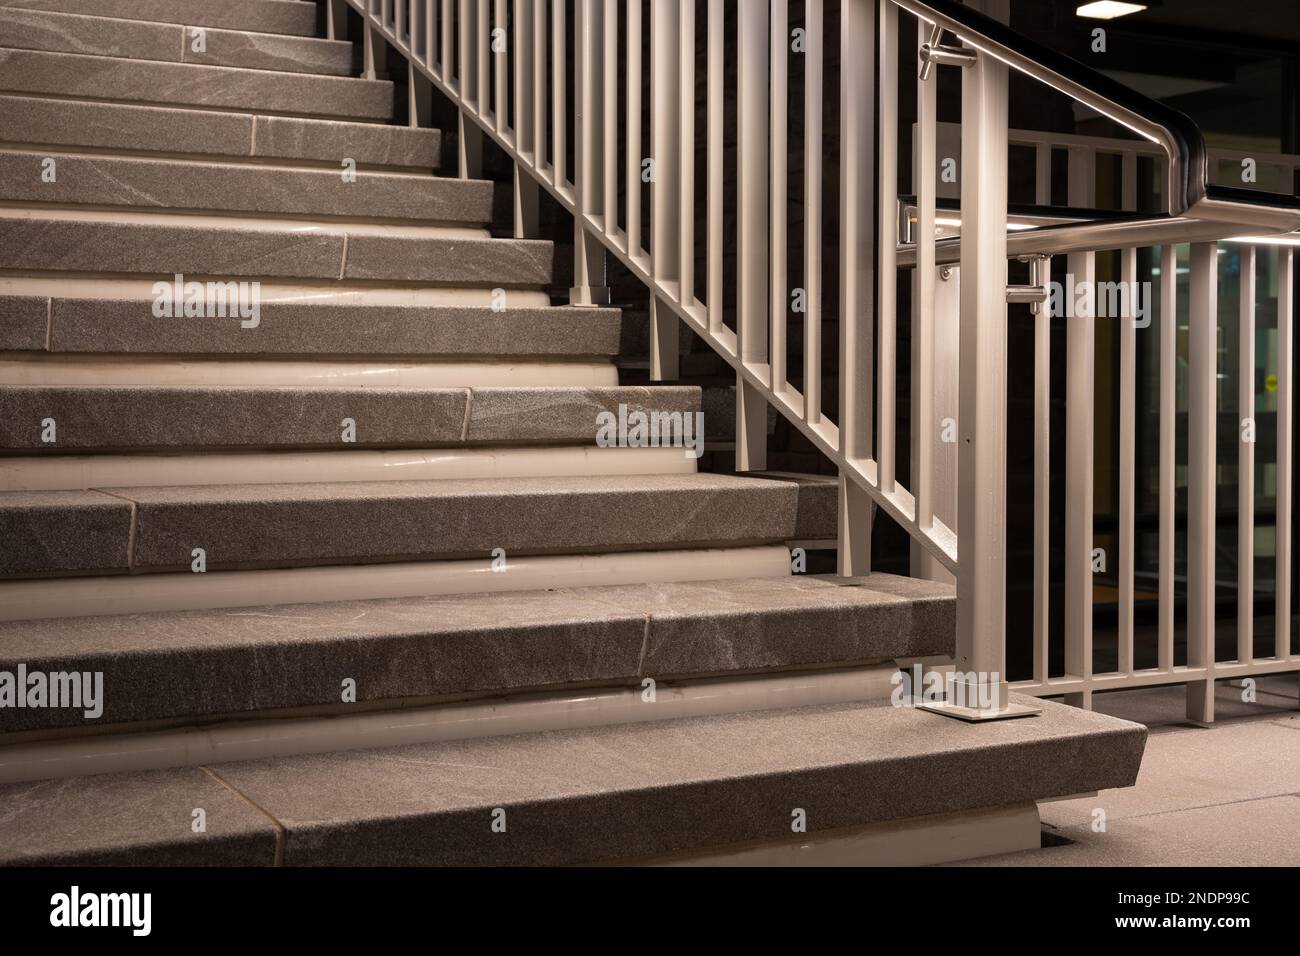 Evening photos of exterior, outdoor building granite steps with hand railing with ambient lighting. Stock Photo